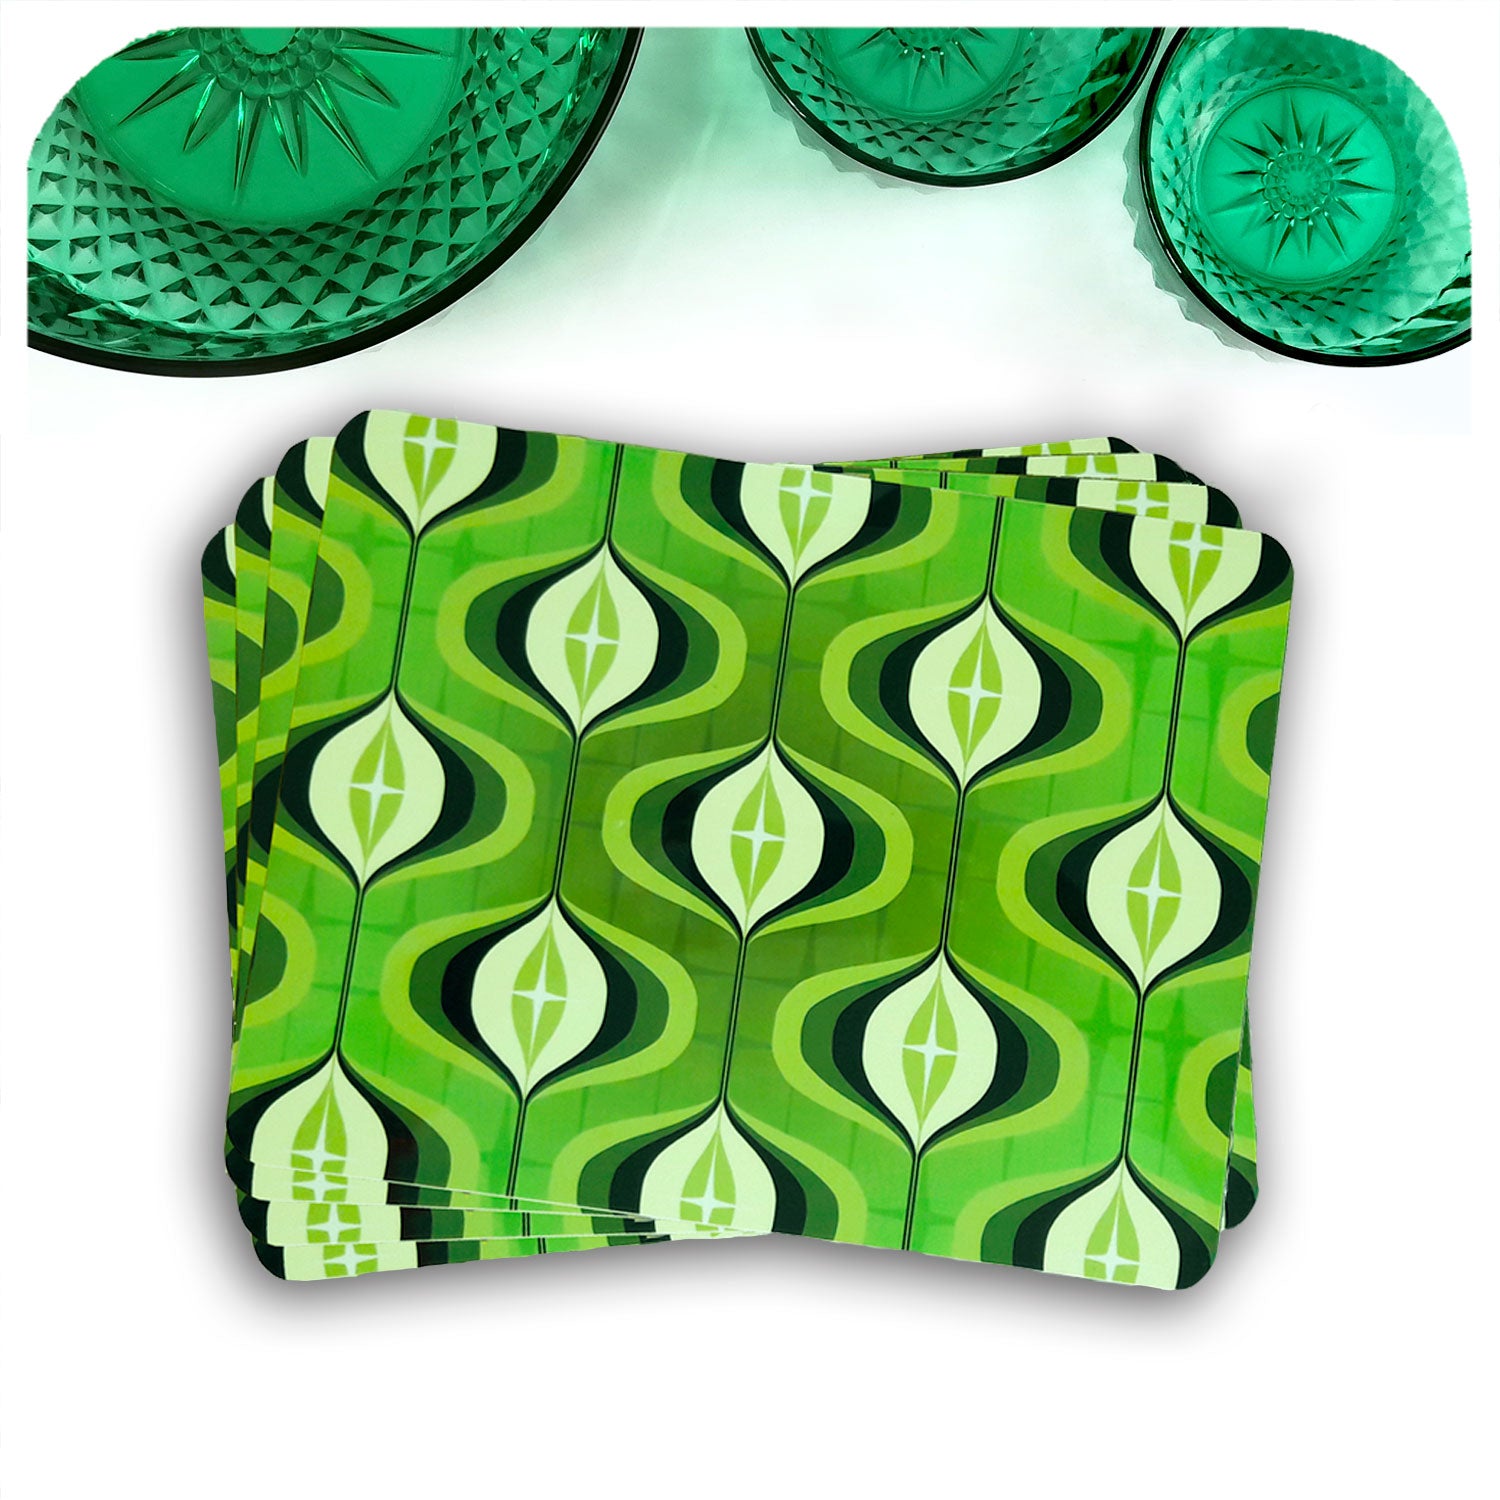 1970s Green Op Art Placemats, set of 4 in a fan | The Inkabilly Emporium